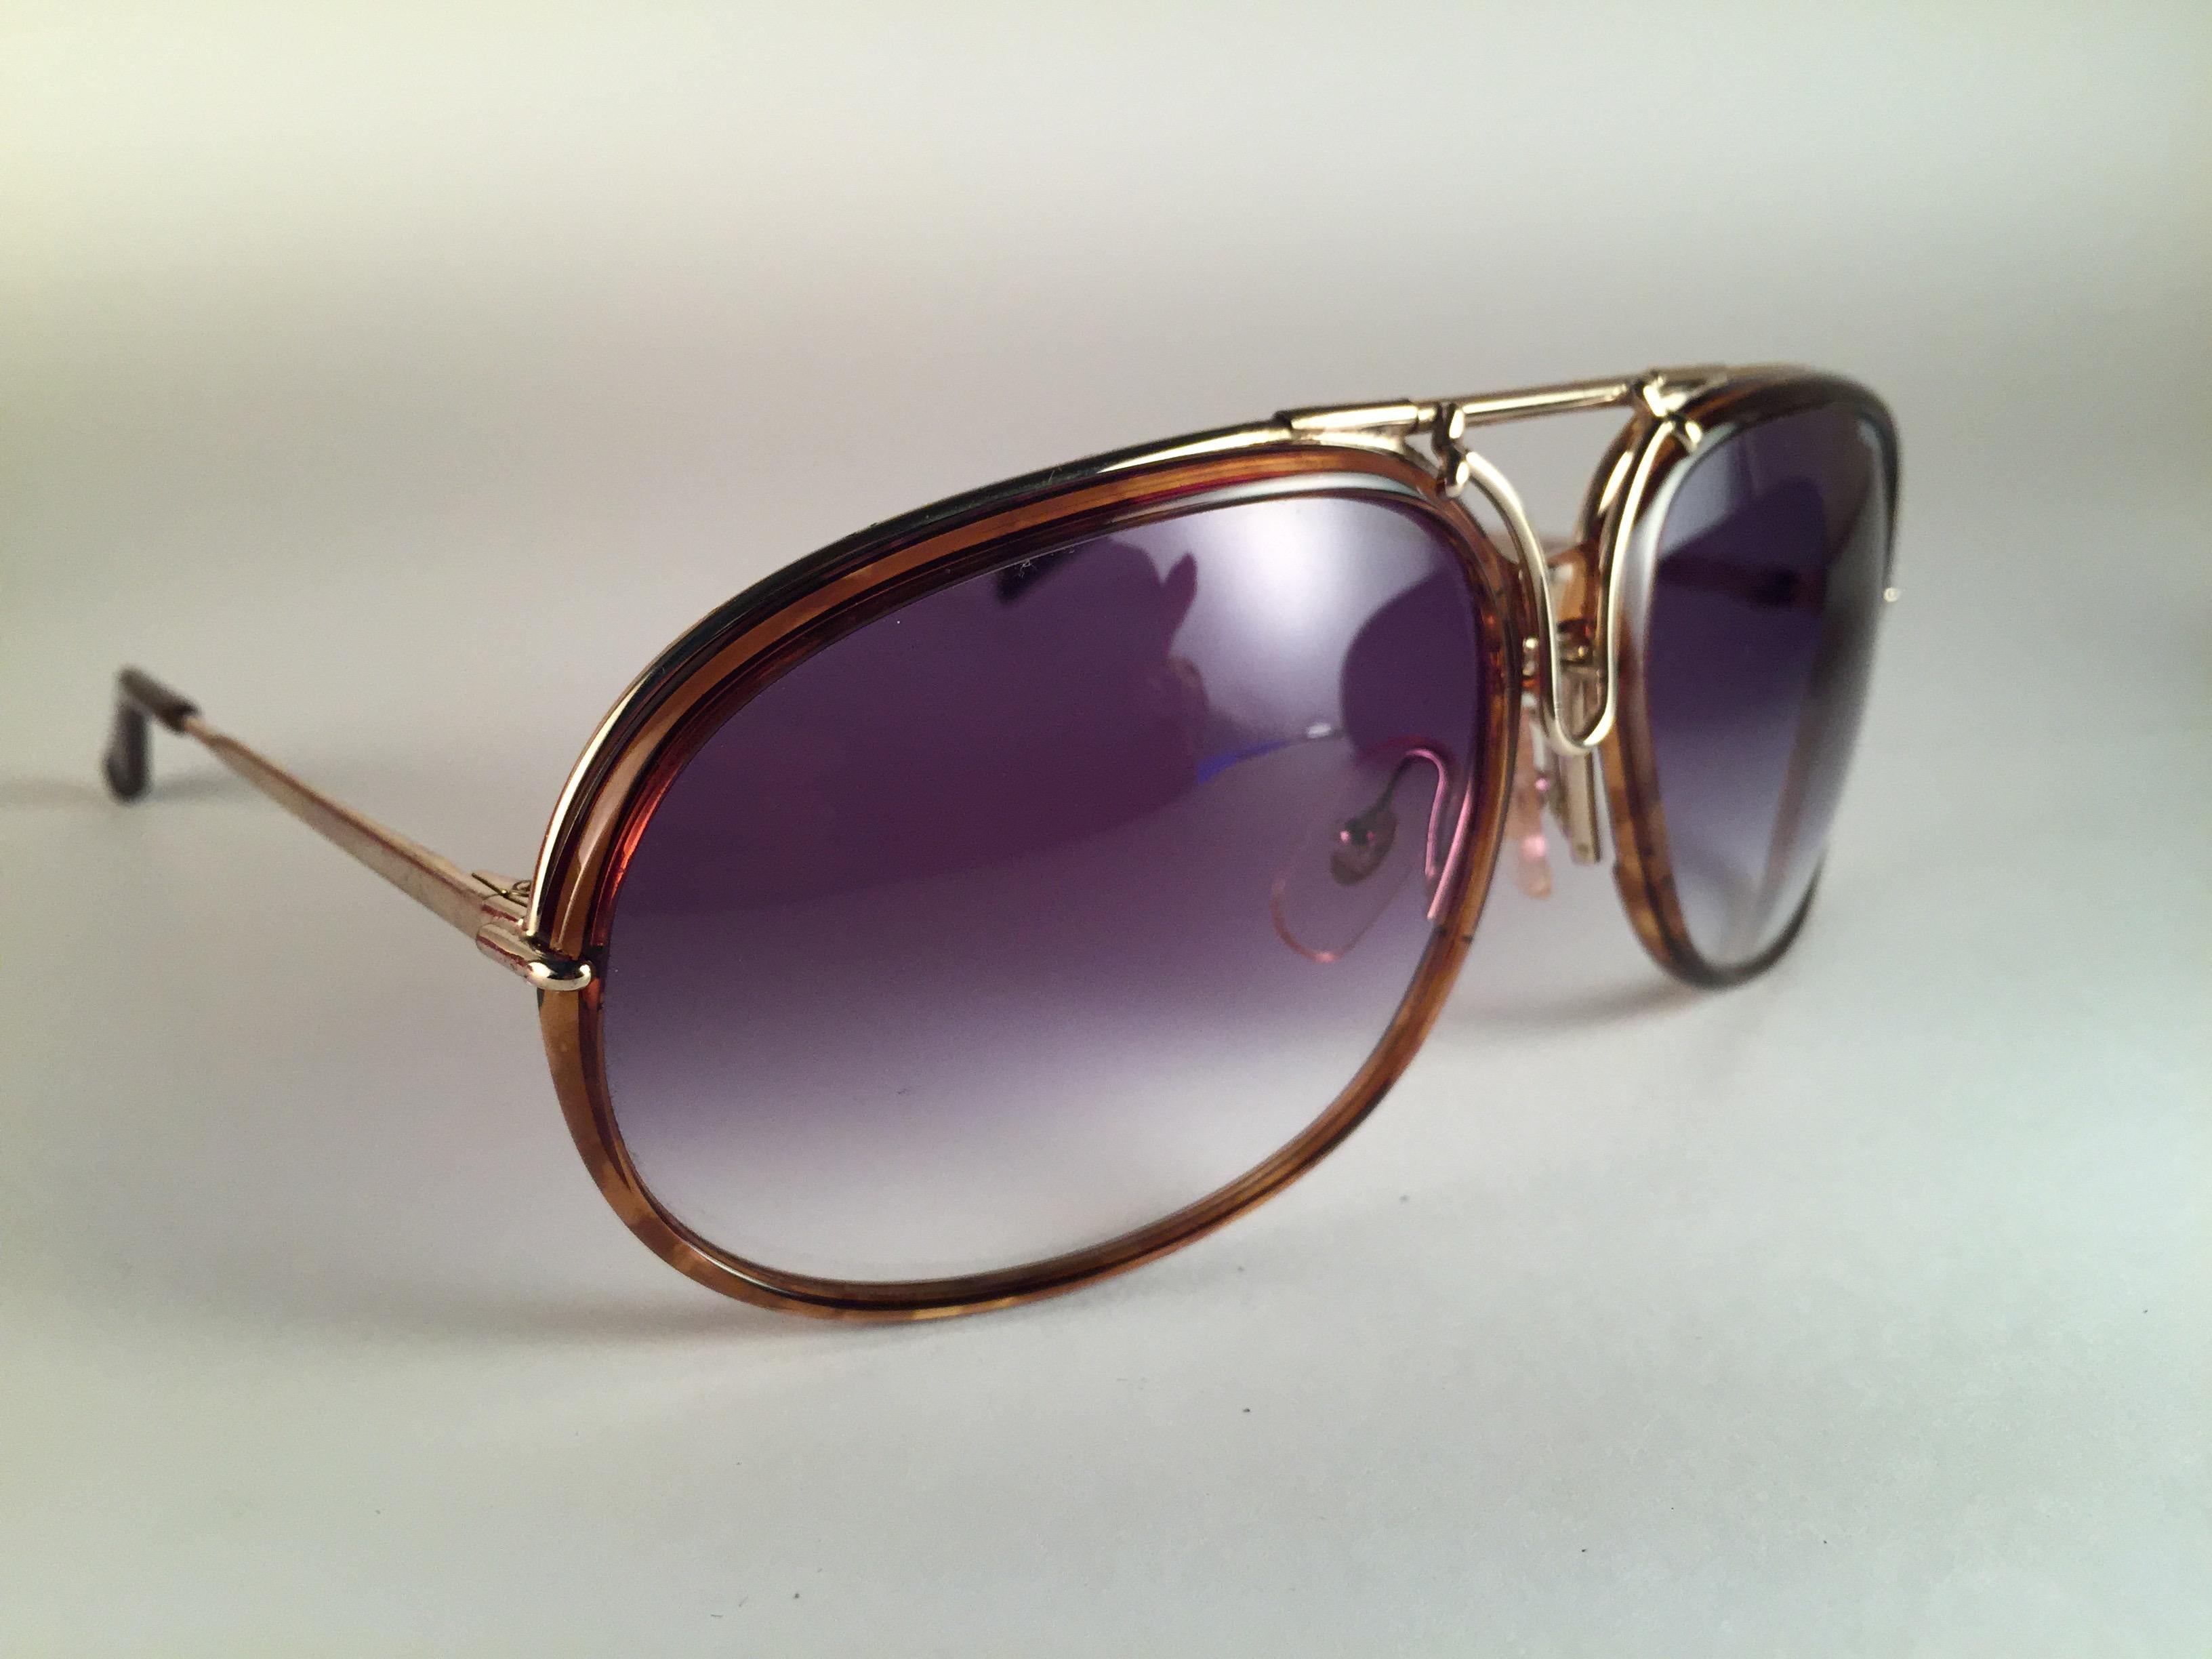 New 1980's Porsche Design 5632 gold and tortoise frame. Grey gradient lenses.
Amazing craftsmanship and quality.   
New, never worn. Made in Austria. This item may show minor sign of wear due to storage.

MEASUREMENTS 

FRONT : 14 CMS

LENS HEIGHT :